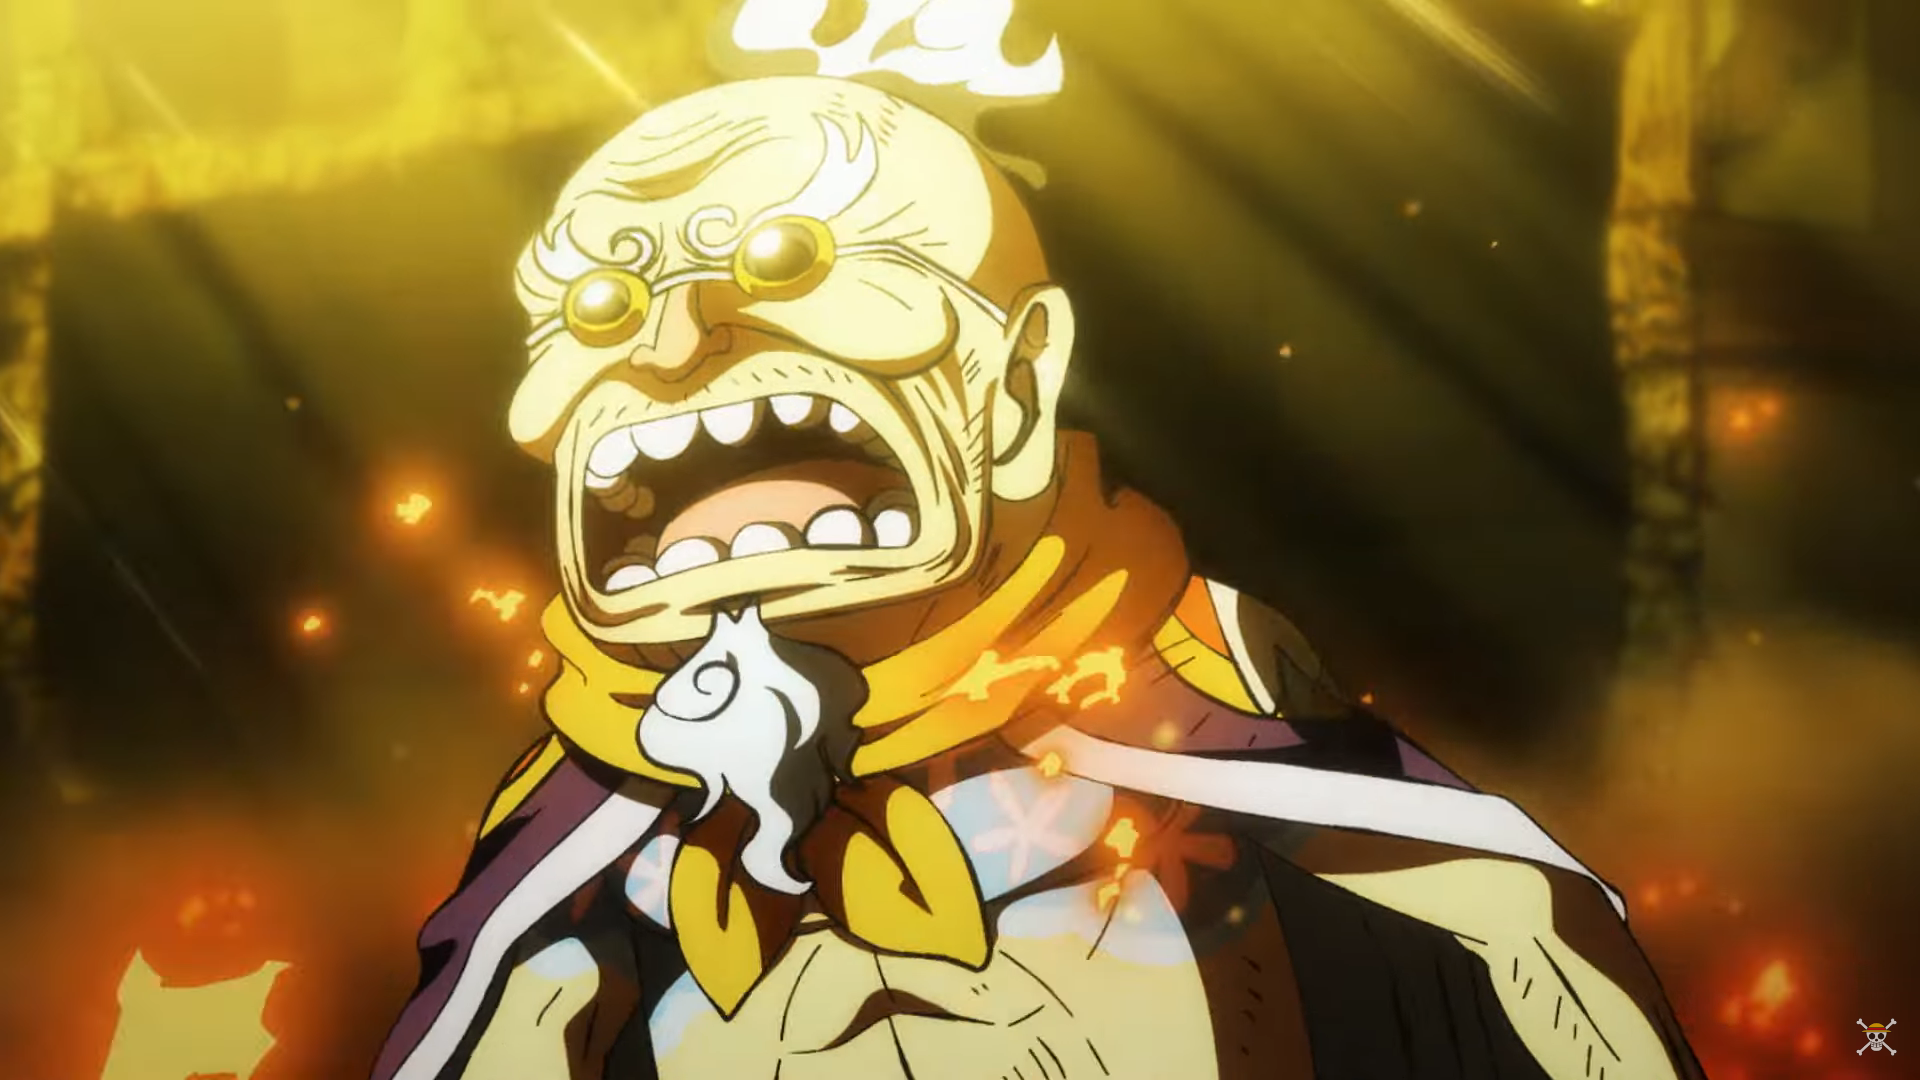 One Piece Promo Previews Anime's Biggest Episode Yet